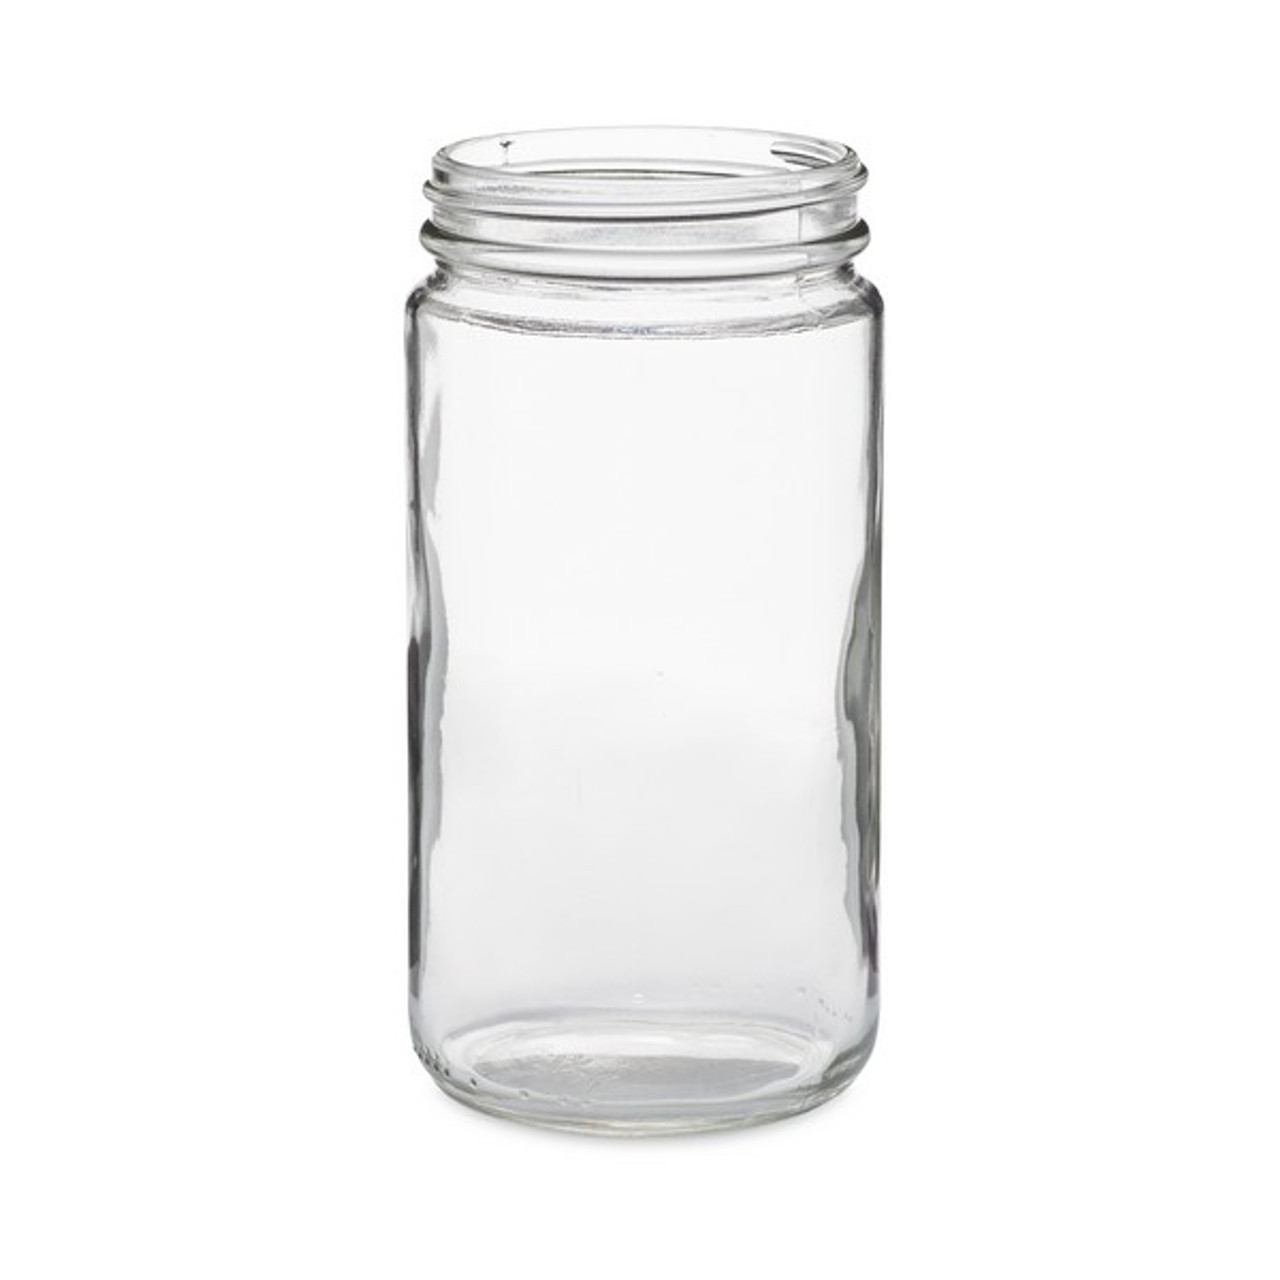 12oz Clear Glass Paragon Spice Jars (Cap Not Included) - 12/Case, Clear Type III BPA Free 63-400